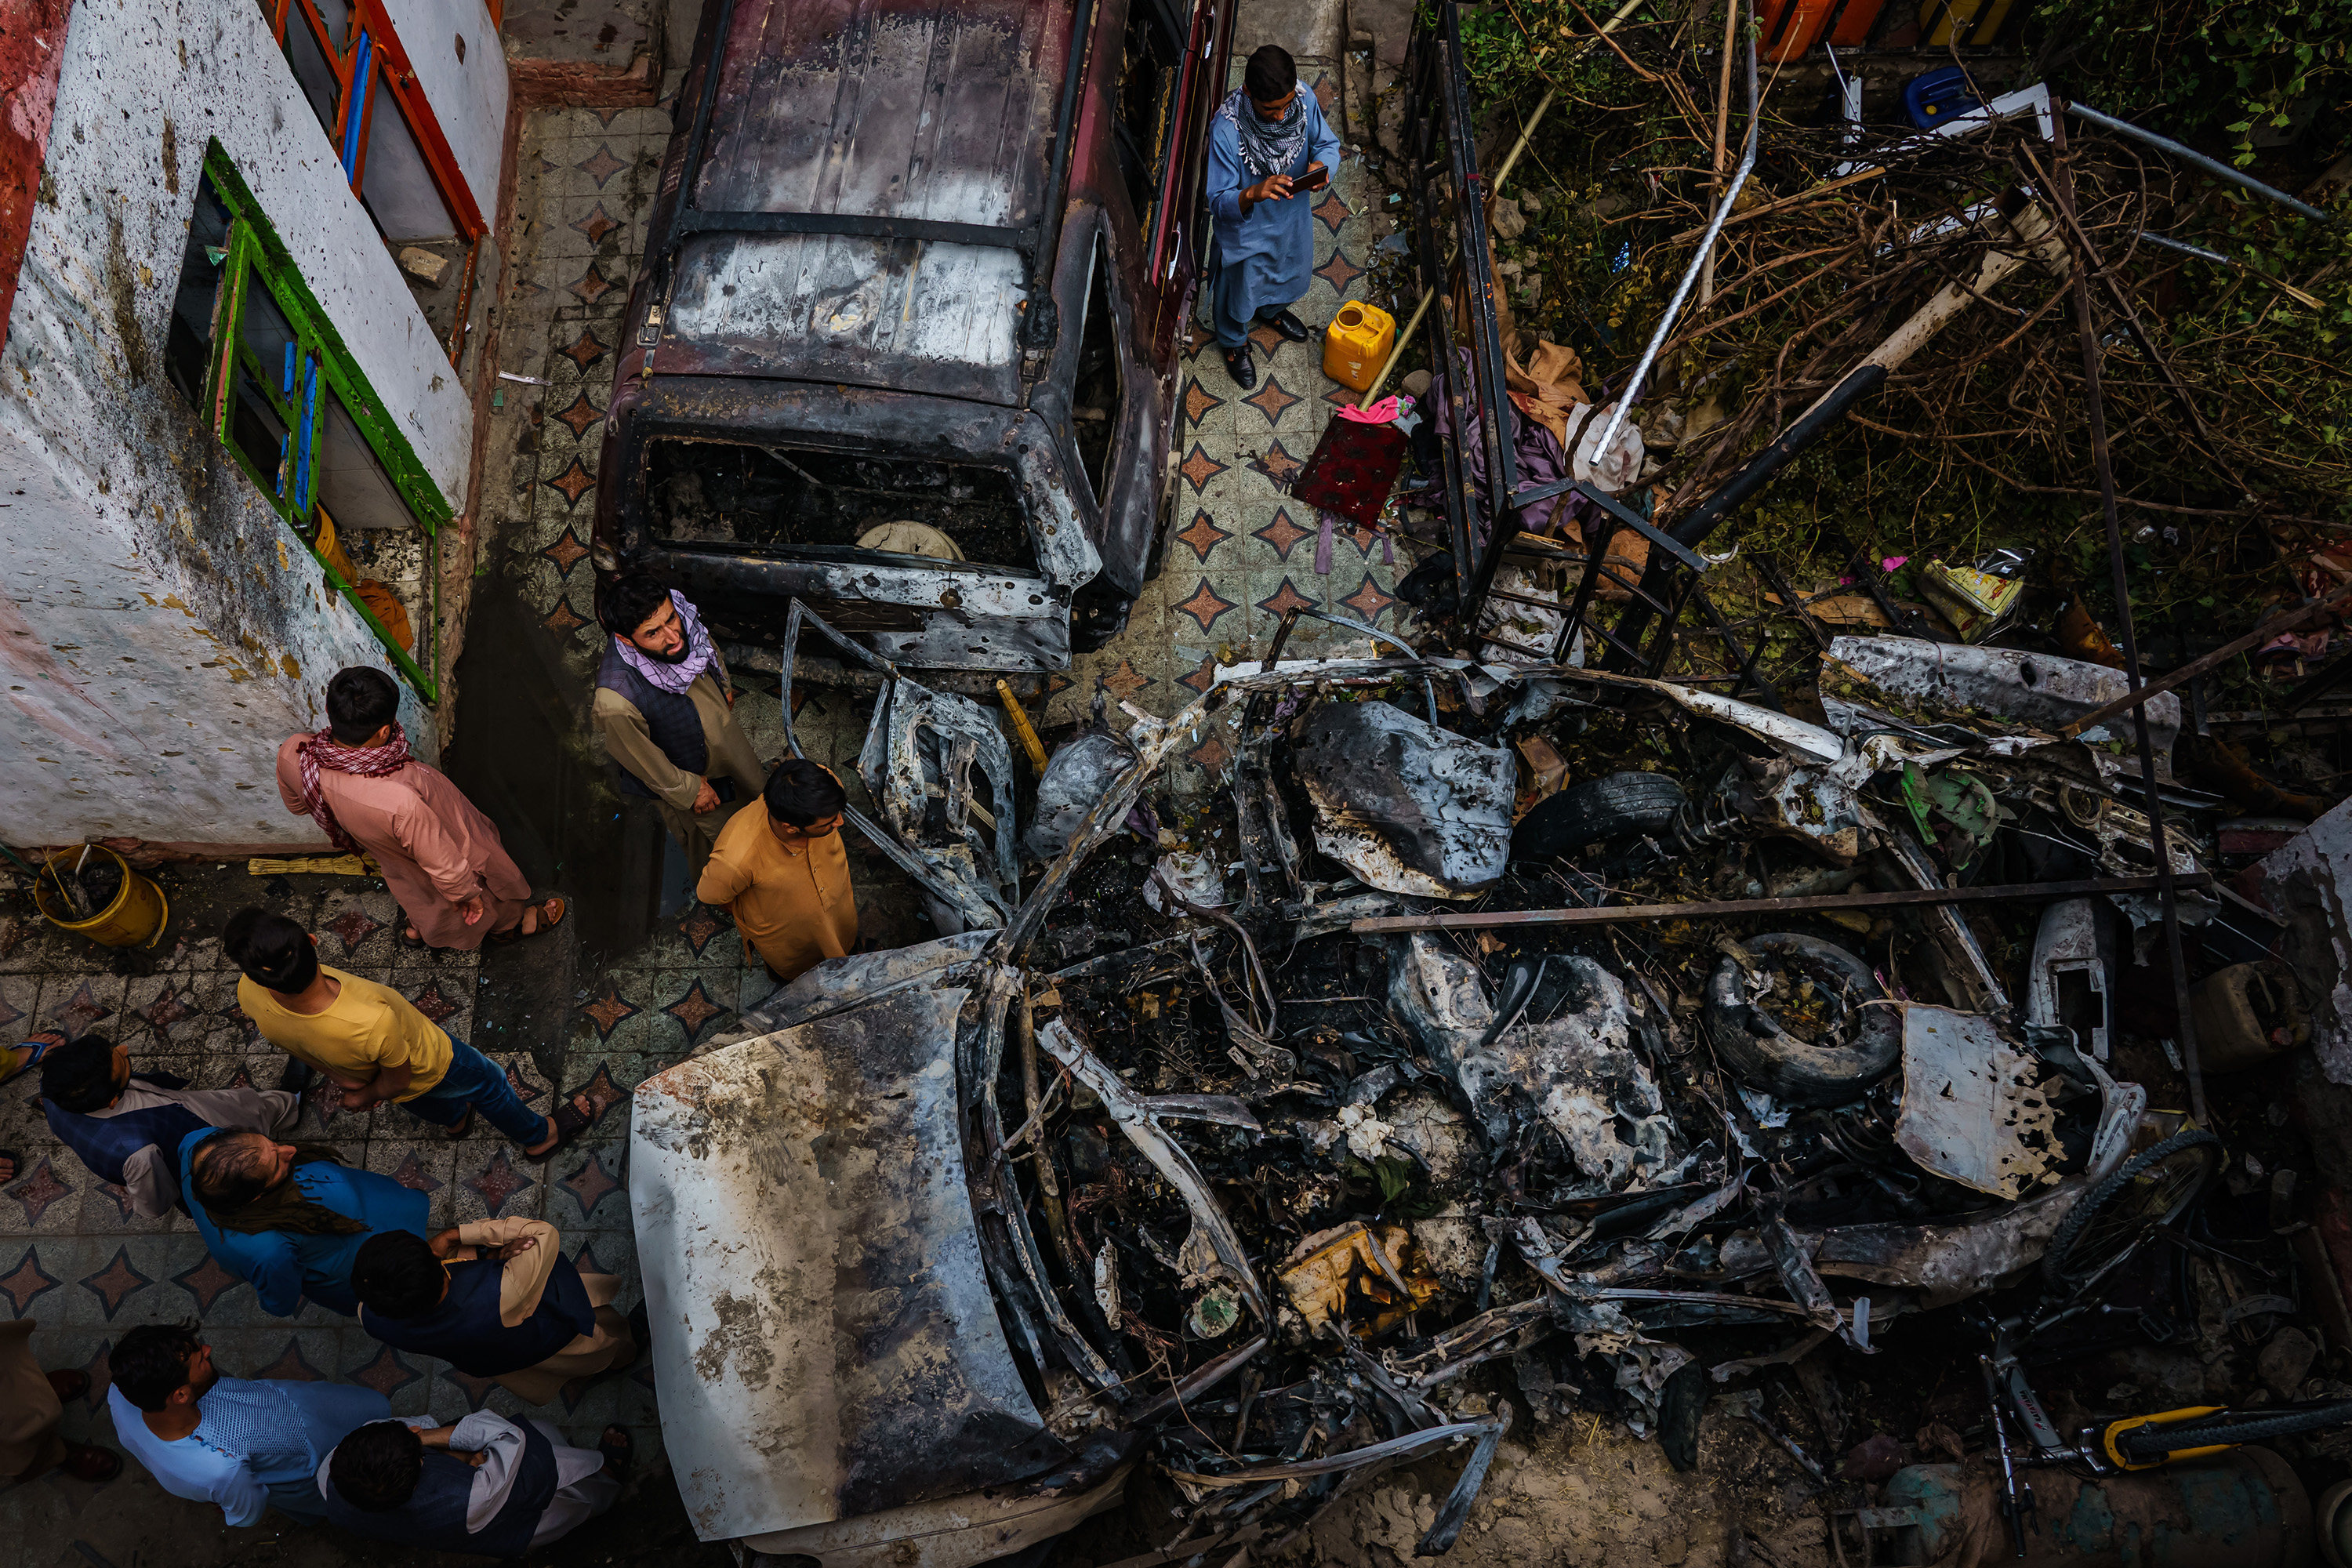 Relatives and neighbours of the Ahmadi family gather around the wreckage of a vehicle that the family says was hit by a US drone strike in Kabul, Afghanistan, on August 30. Photo: TNS